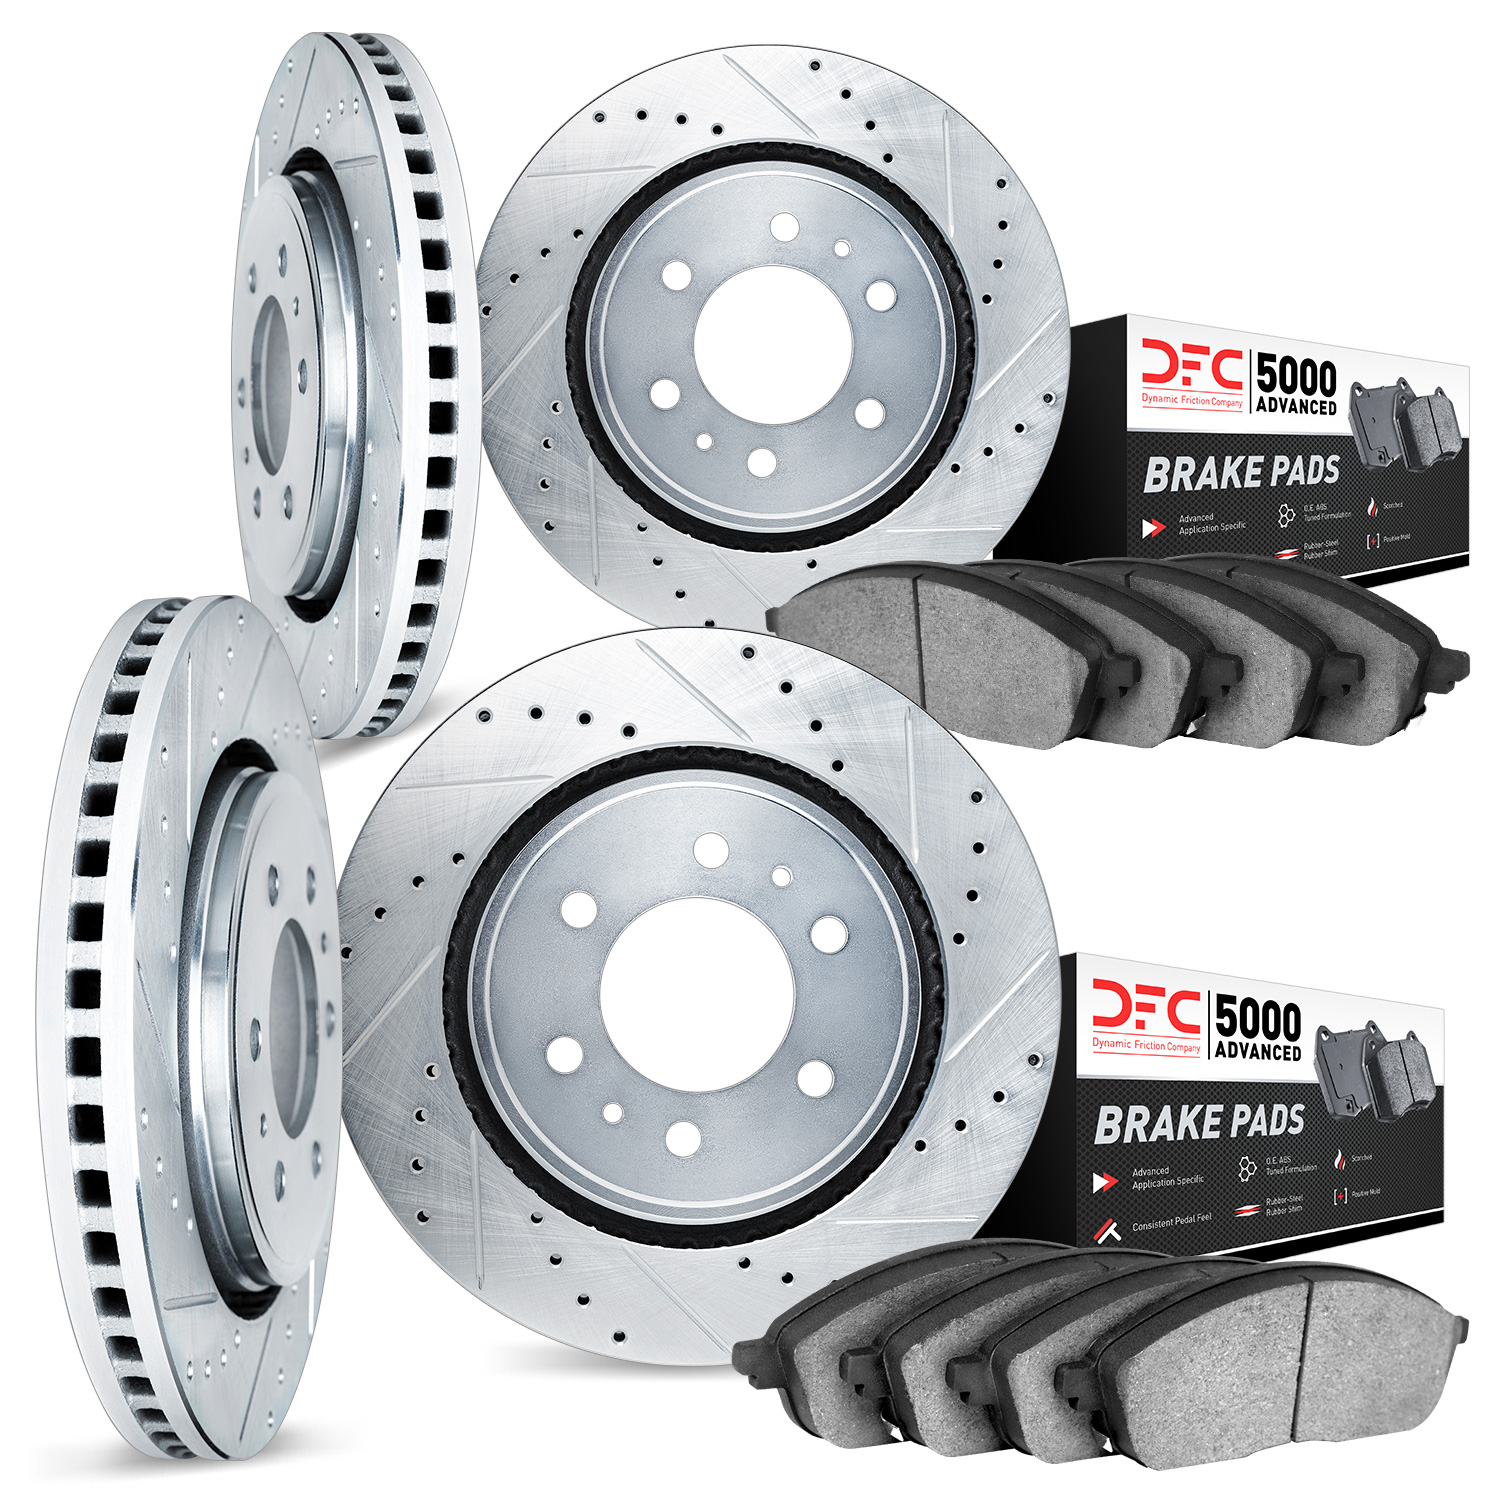 7504-37007 Drilled/Slotted Brake Rotors w/5000 Advanced Brake Pads Kit [Silver], 1992-2002 Multiple Makes/Models, Position: Fron